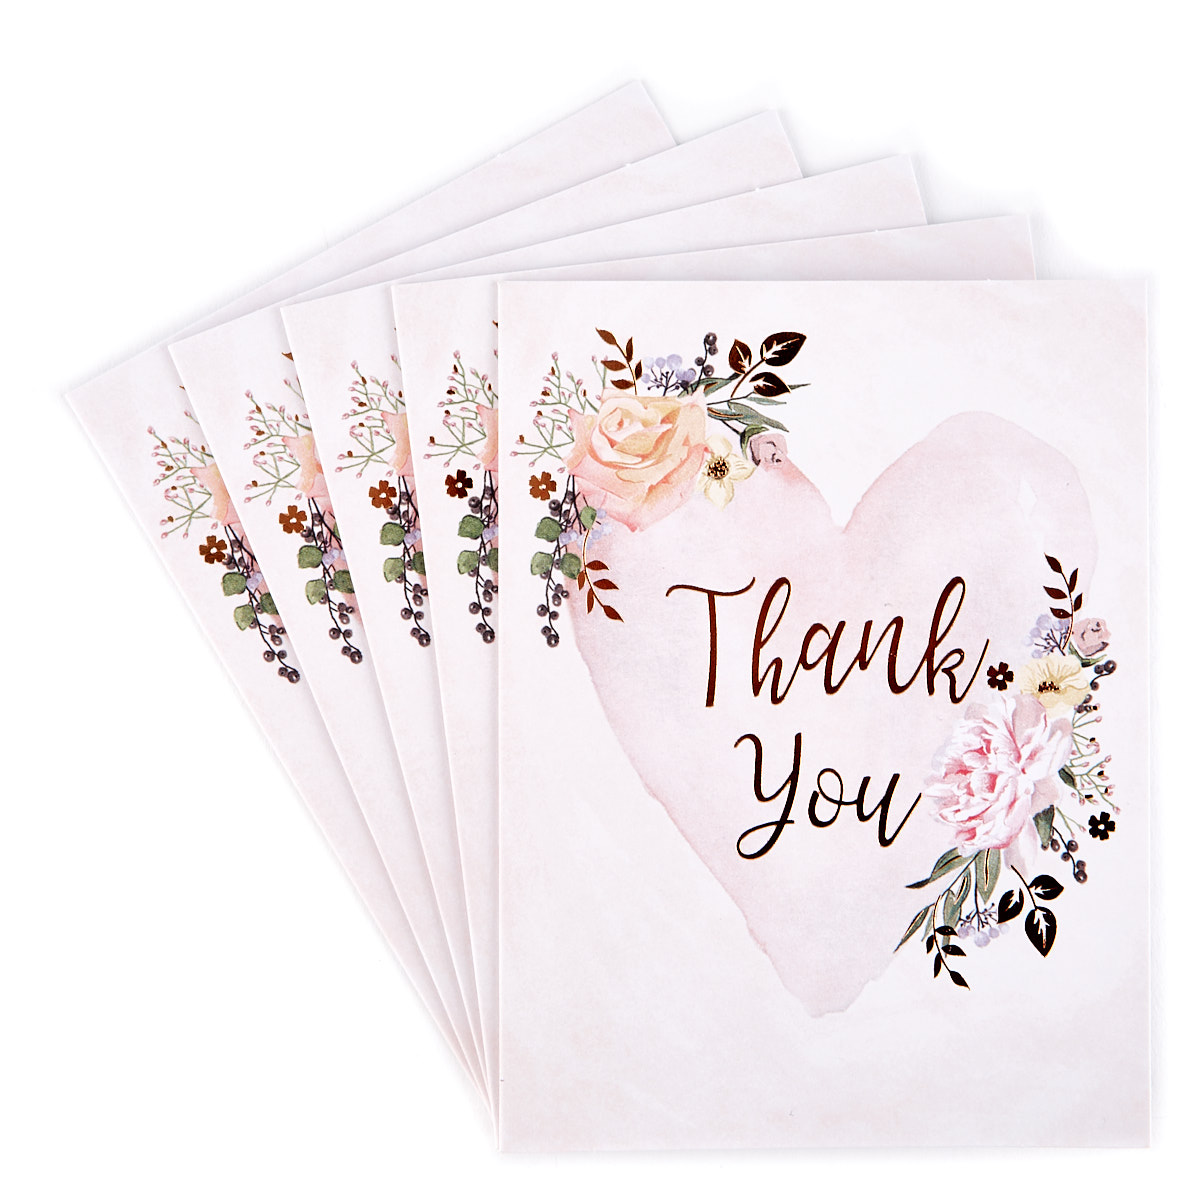 Heart & Flowers Thank You Cards - Pack of 12